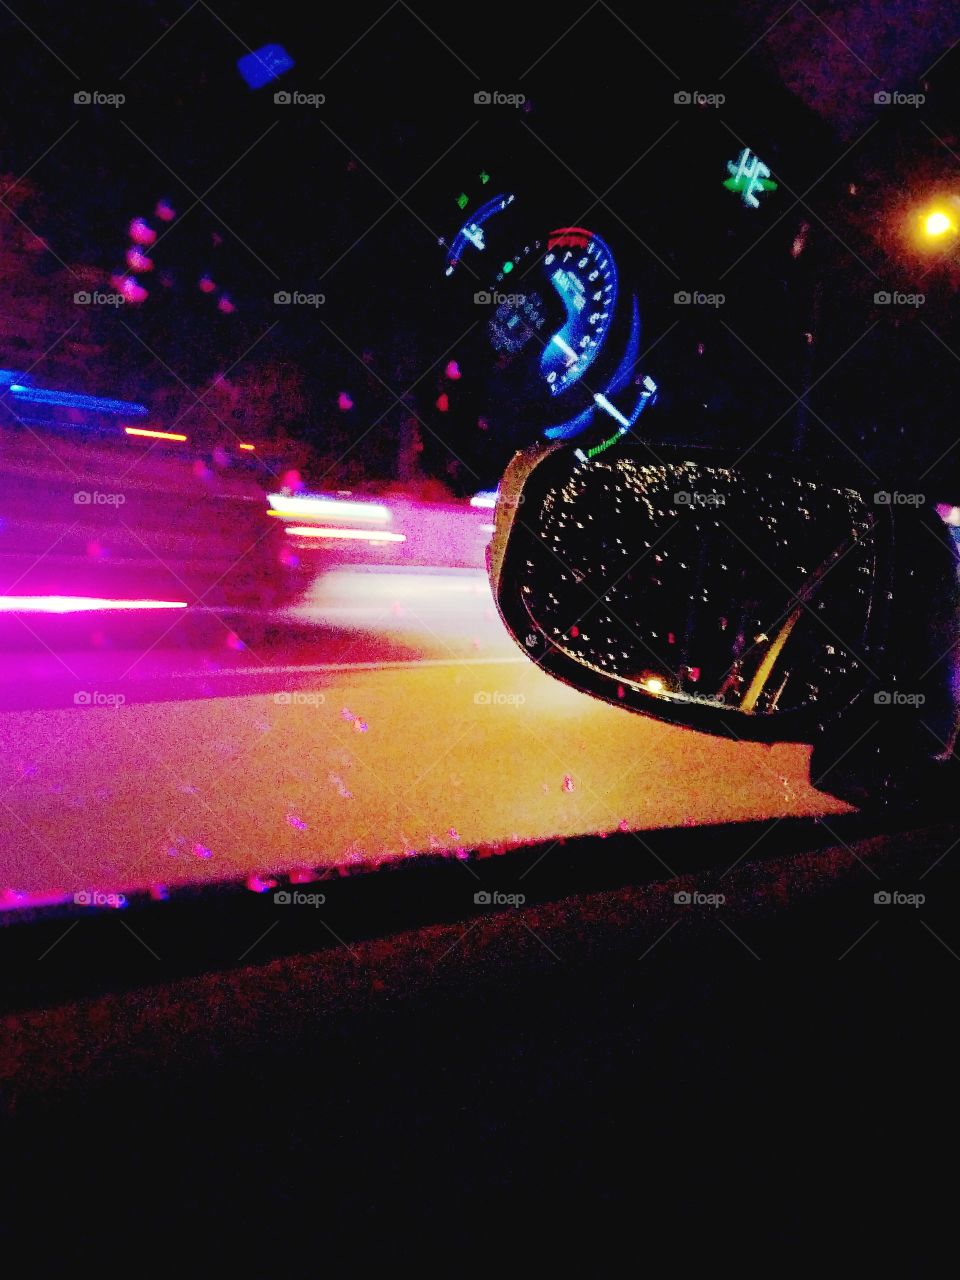 photographic distortion created from rain  reflecting police lights and motion blur